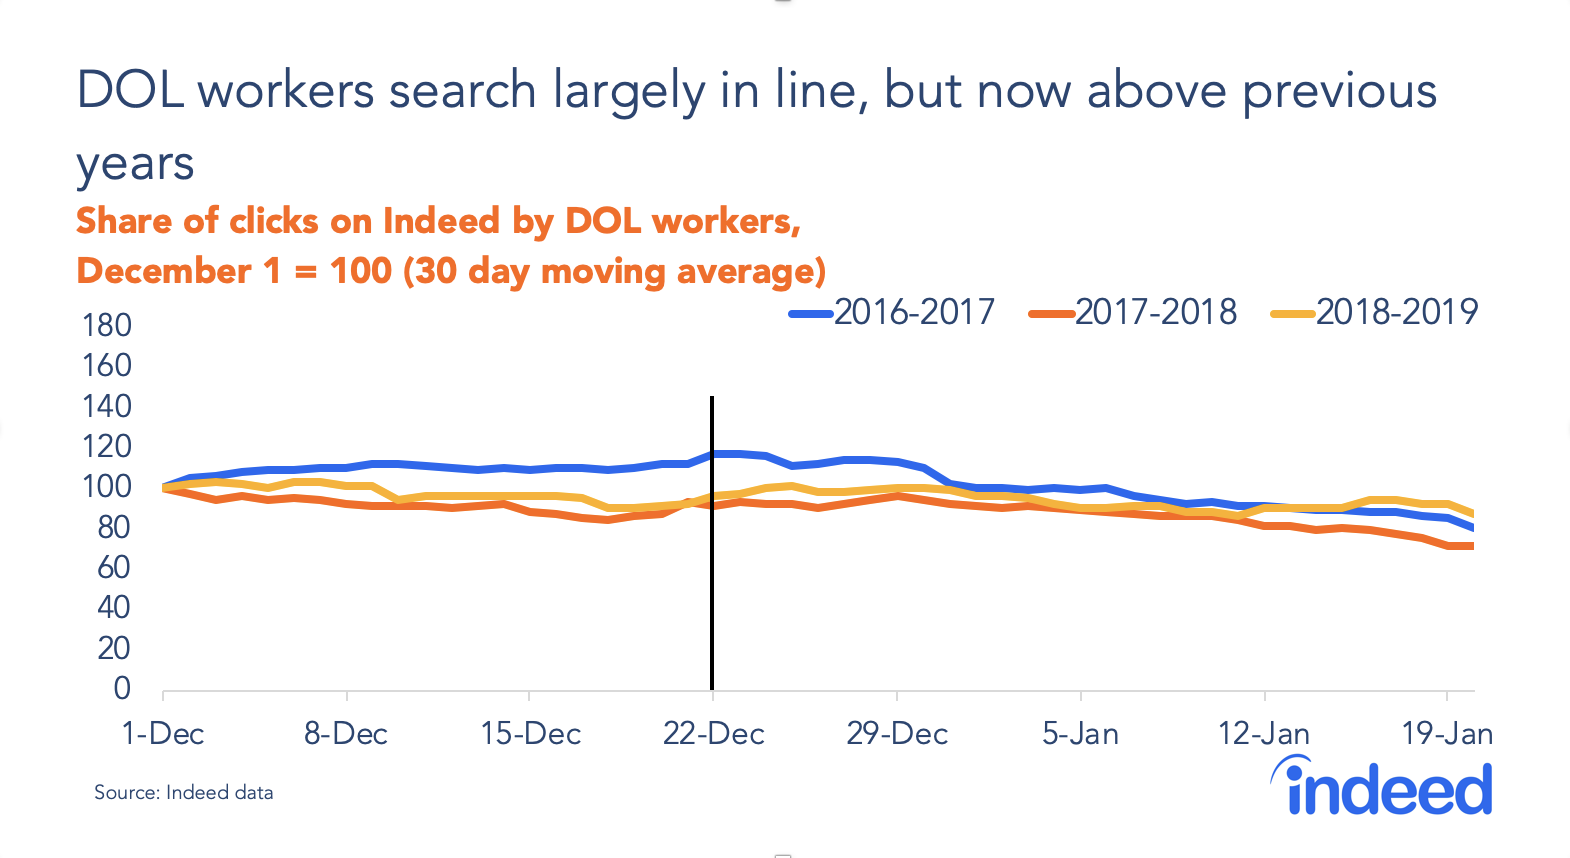 DOL workers search largely in line, but now above previous years